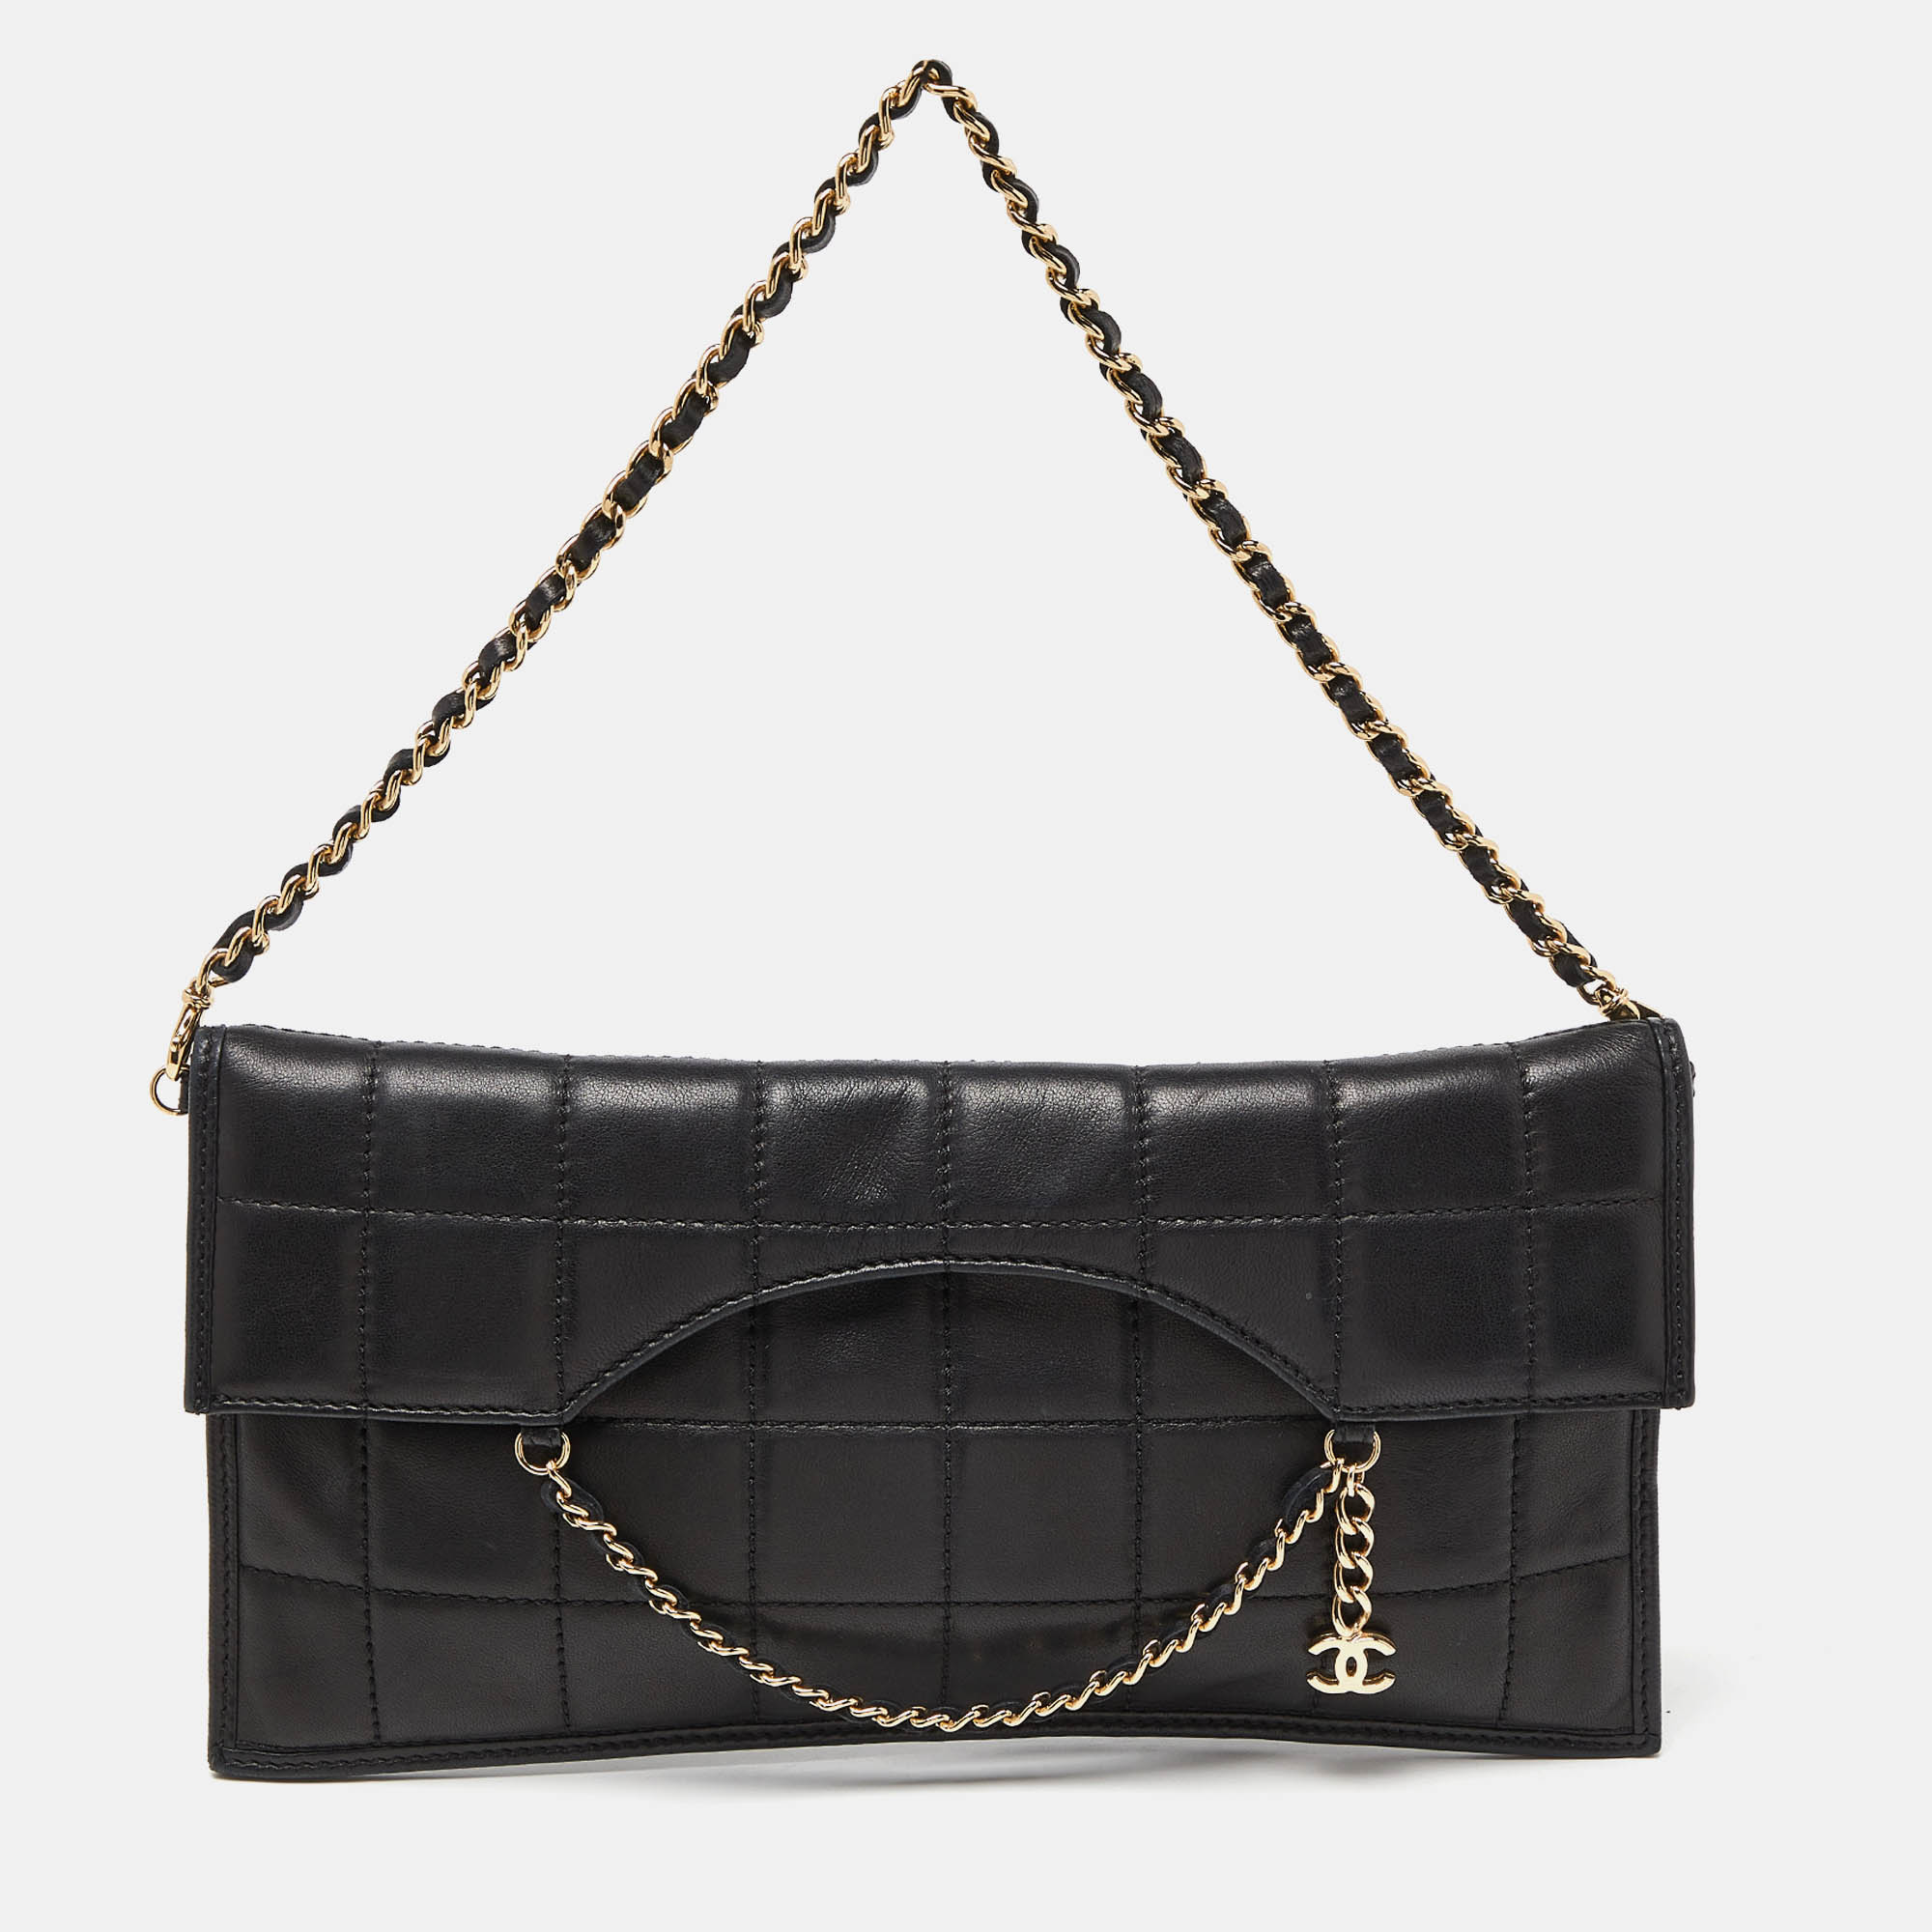 

Chanel Bar Quilted Leather Fold Down Envelope Clutch Bag, Black